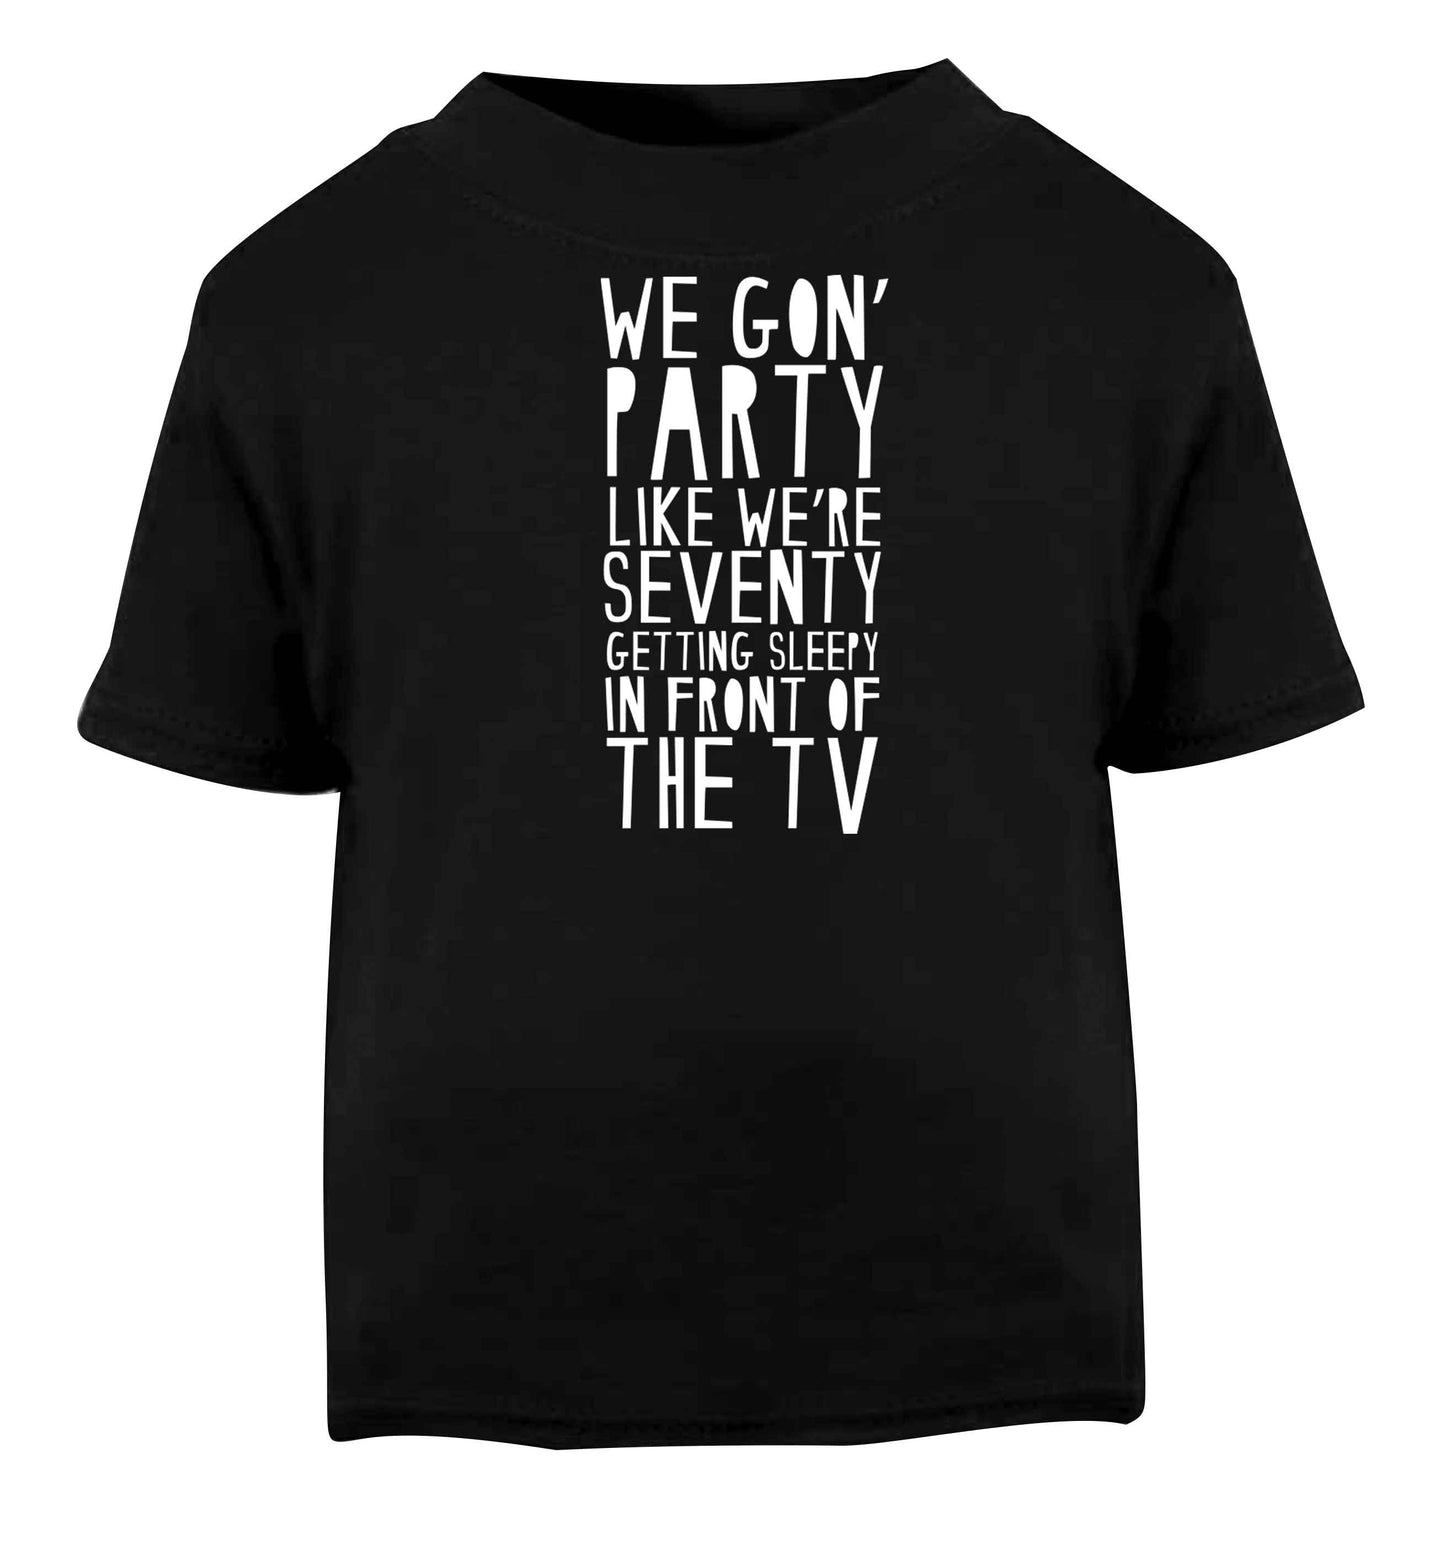 We gon' party like we're seventy getting sleepy in front of the TV Black baby toddler Tshirt 2 years